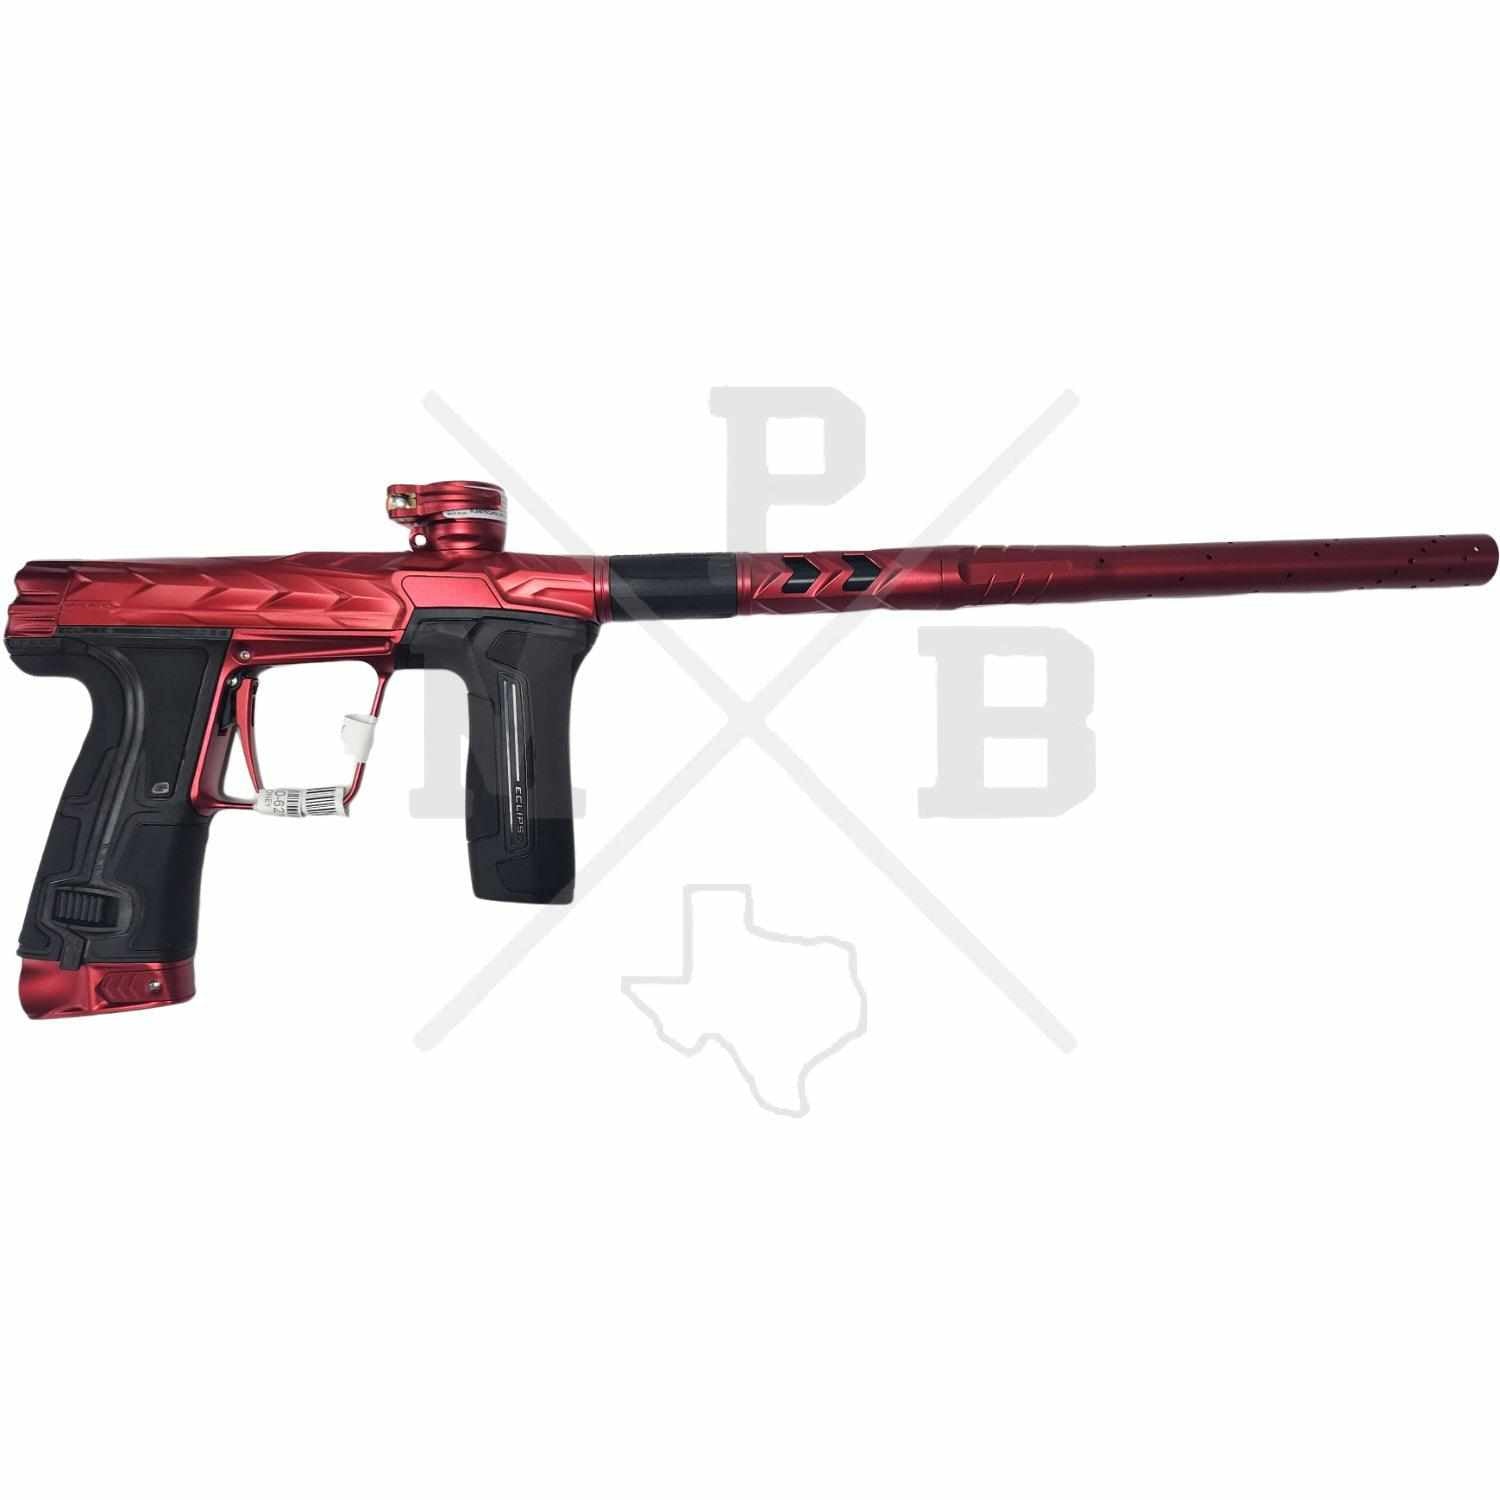 Planet Eclipse LVR - Pure - Mazens Paintball